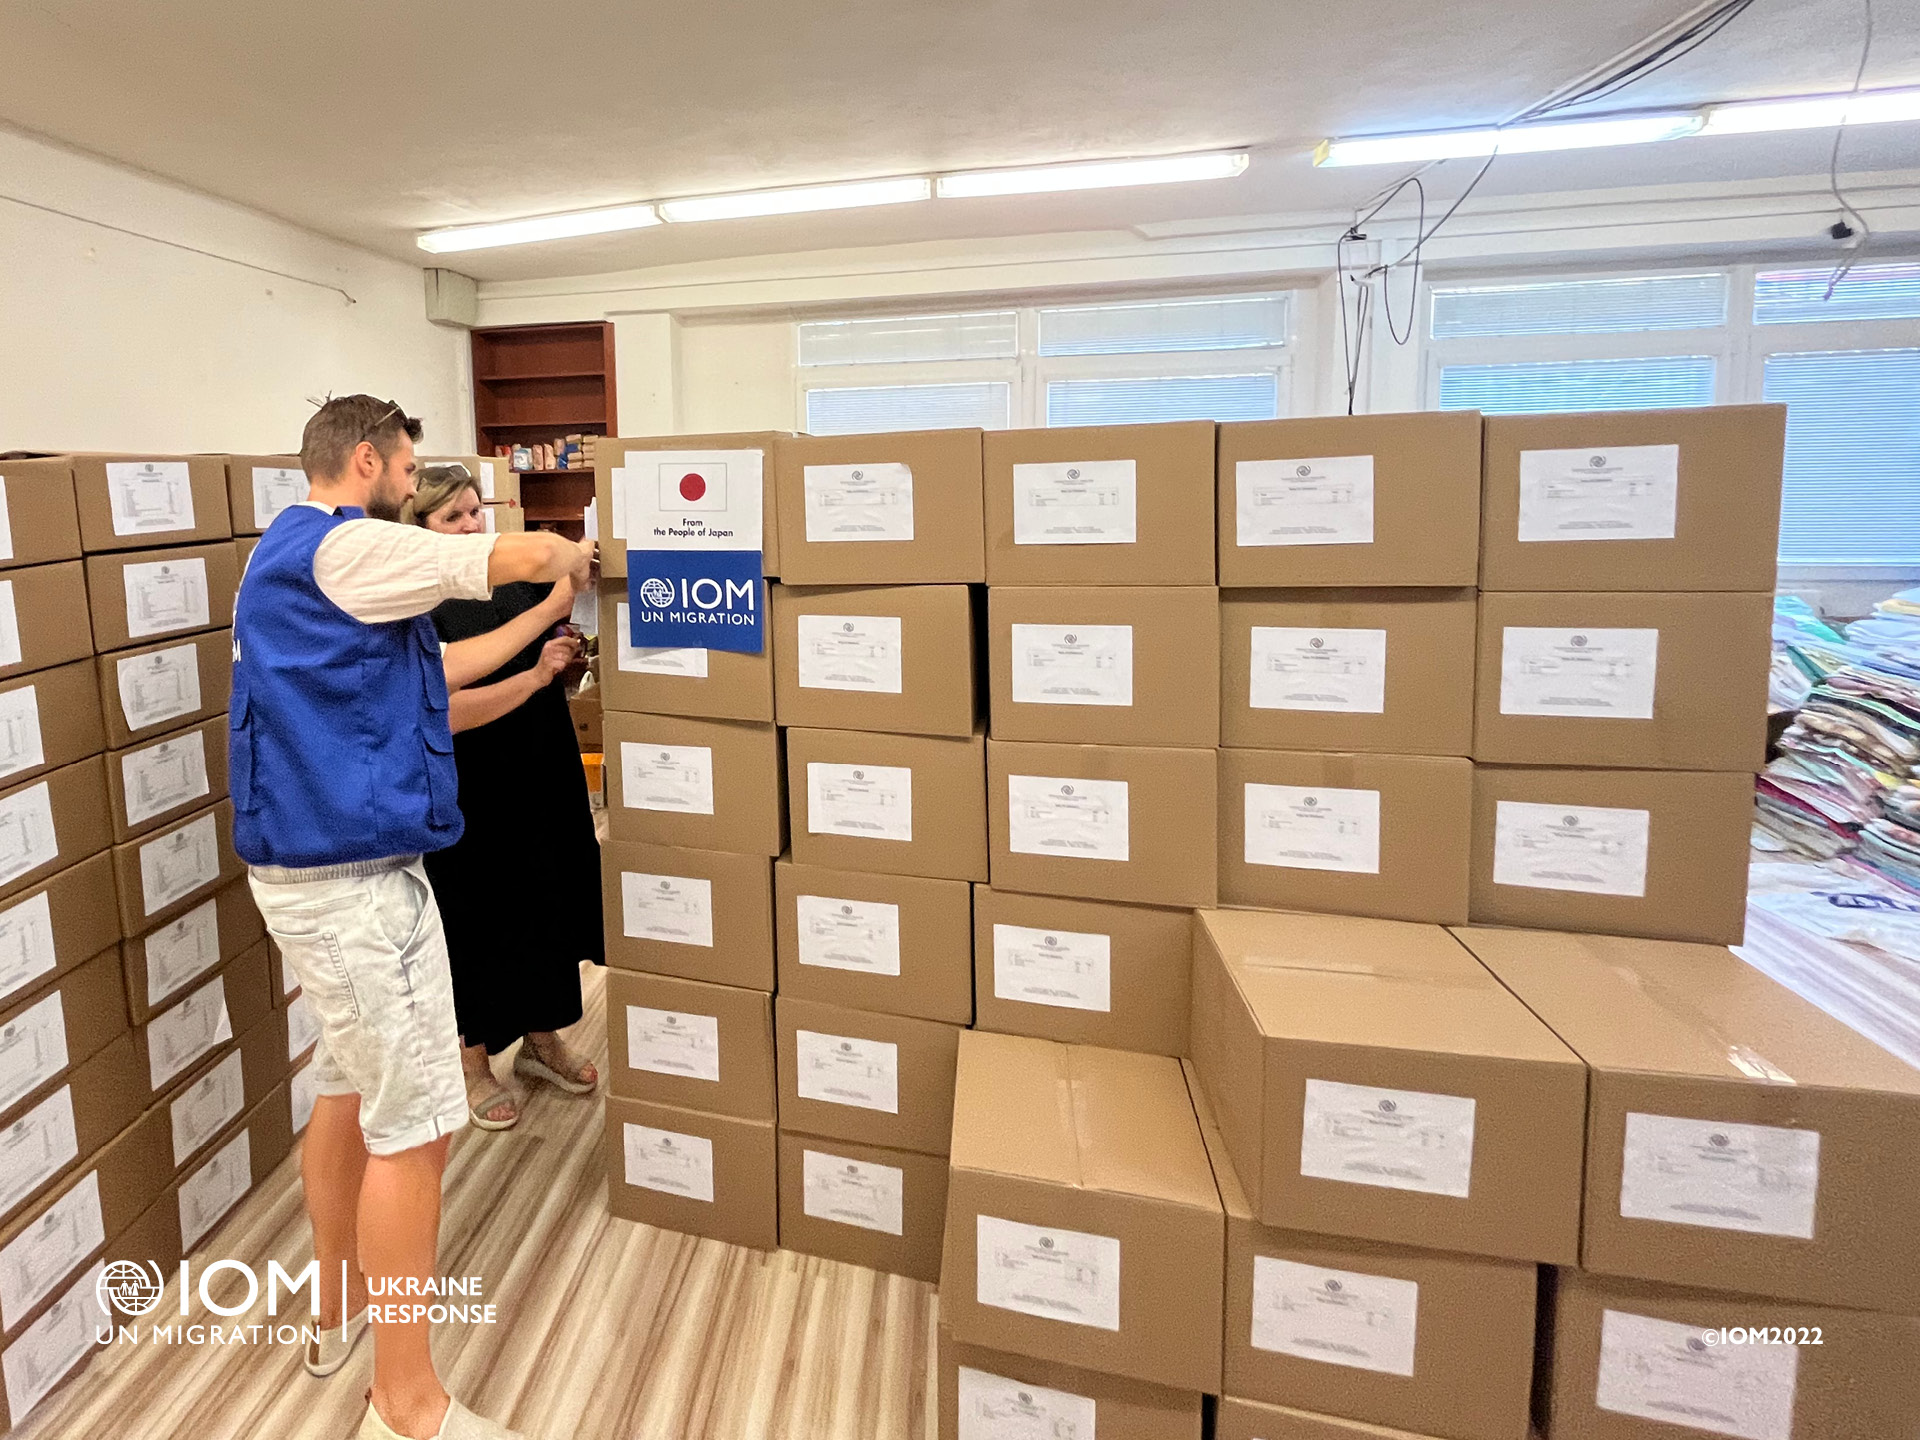 Delivery of humanitarian assistance to Nitra in August 2022. Photo © International Organization for Migration (IOM) 2022.